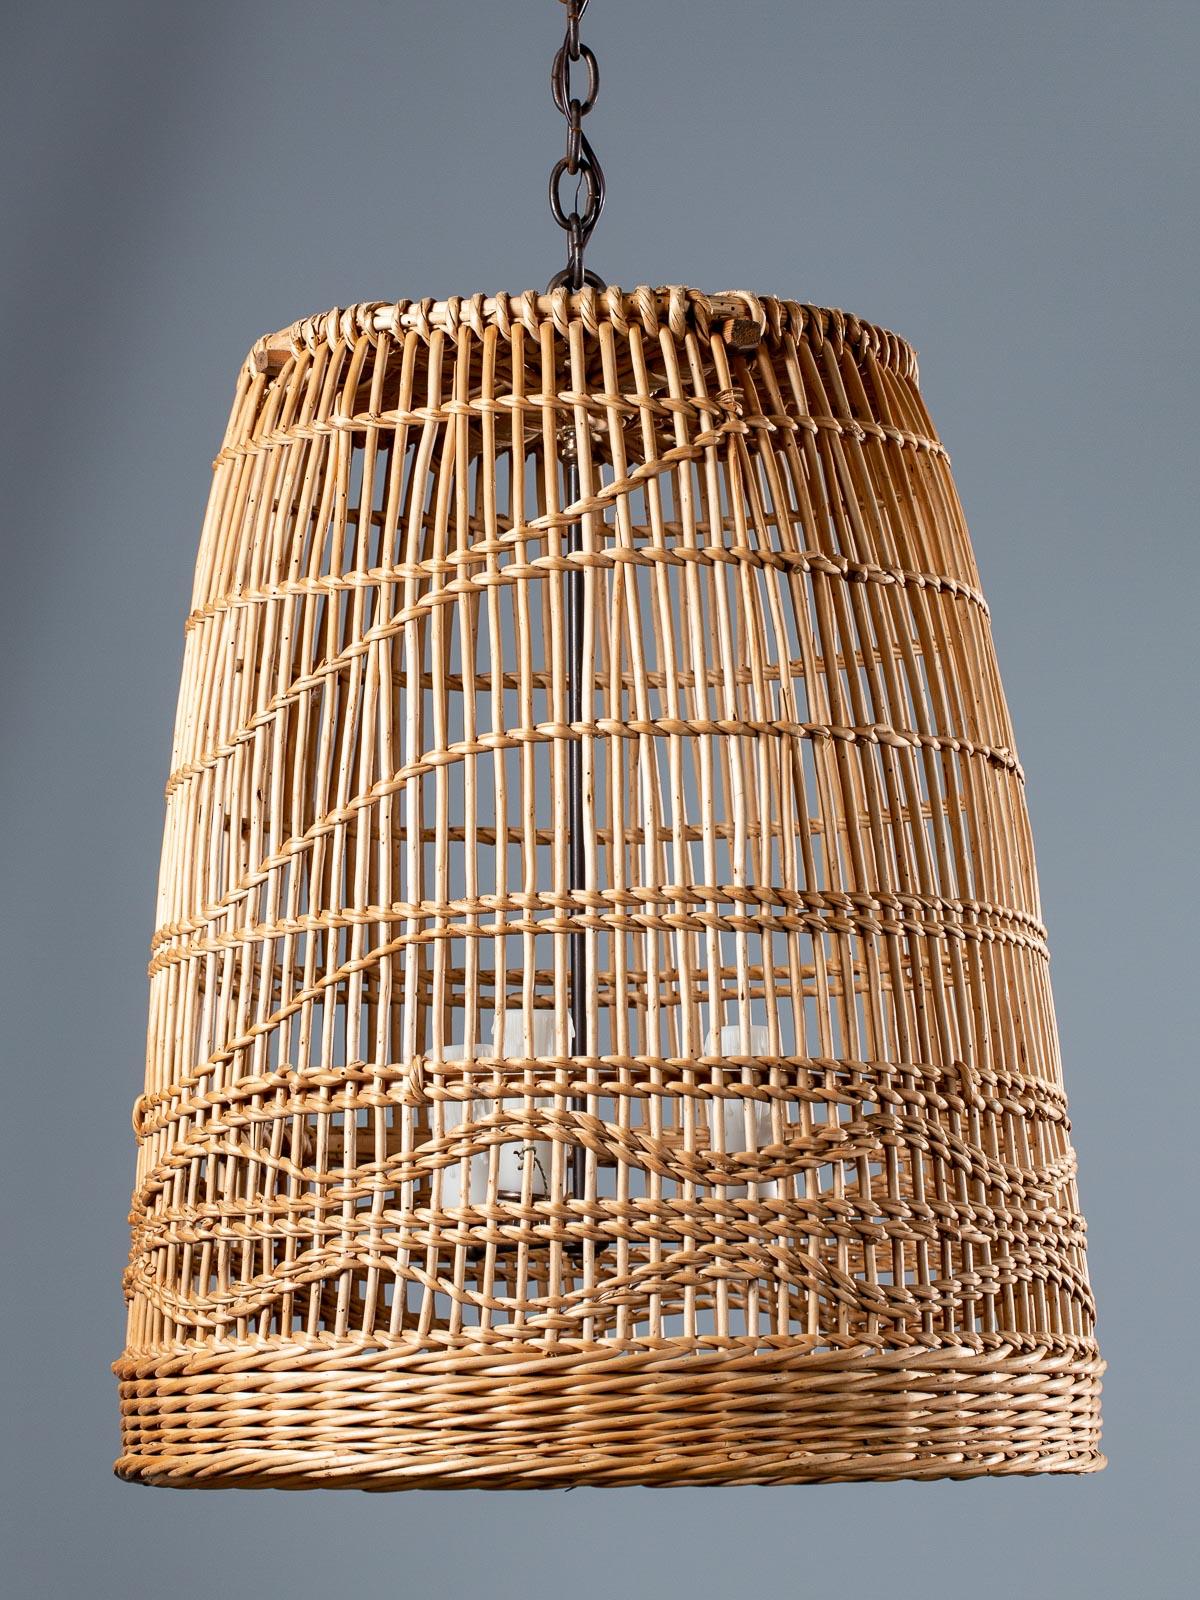 A super vintage French handwoven reed basket chandelier light fixture lantern circa 1920. Please enlarge the photographs to see the terrific pattern of the wave like weave in this bell shaped light fixture. We have now converted the basket into a